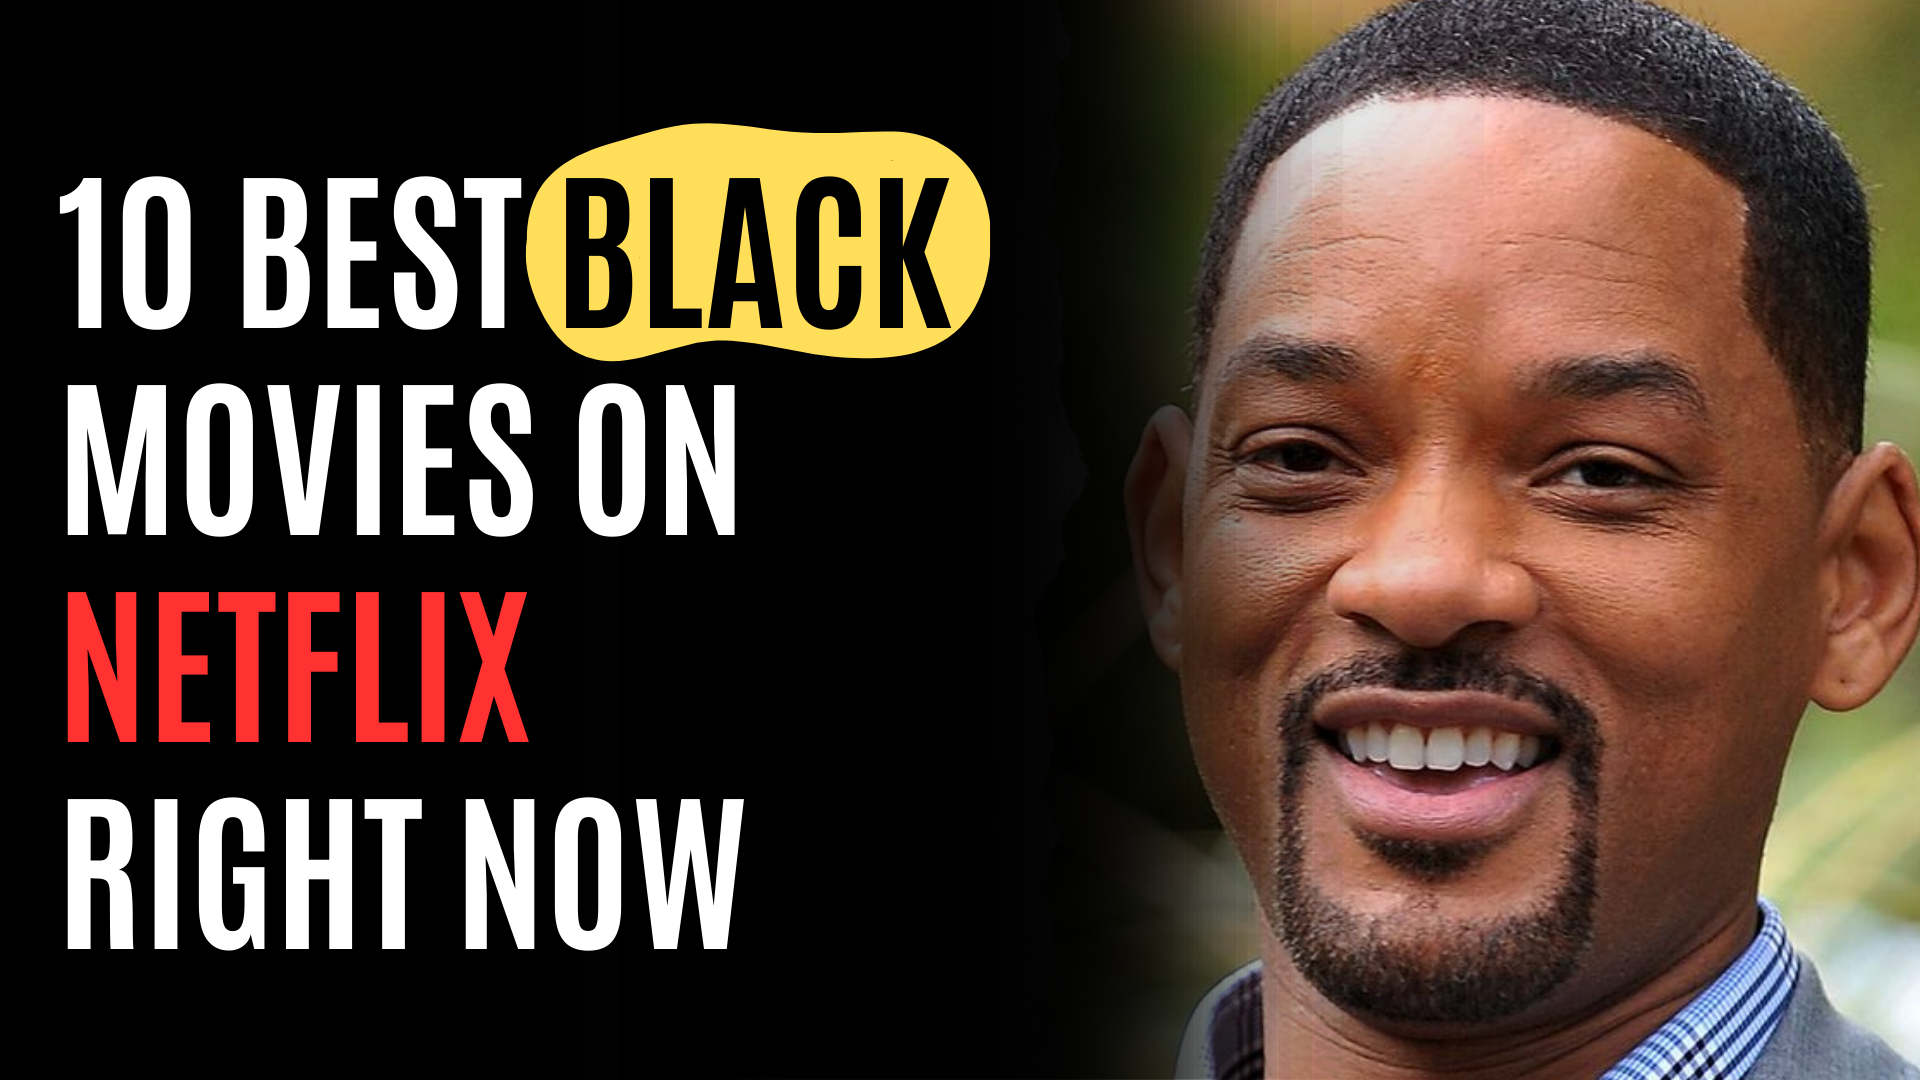 The 10 Best Black Movies on Netflix Right Now